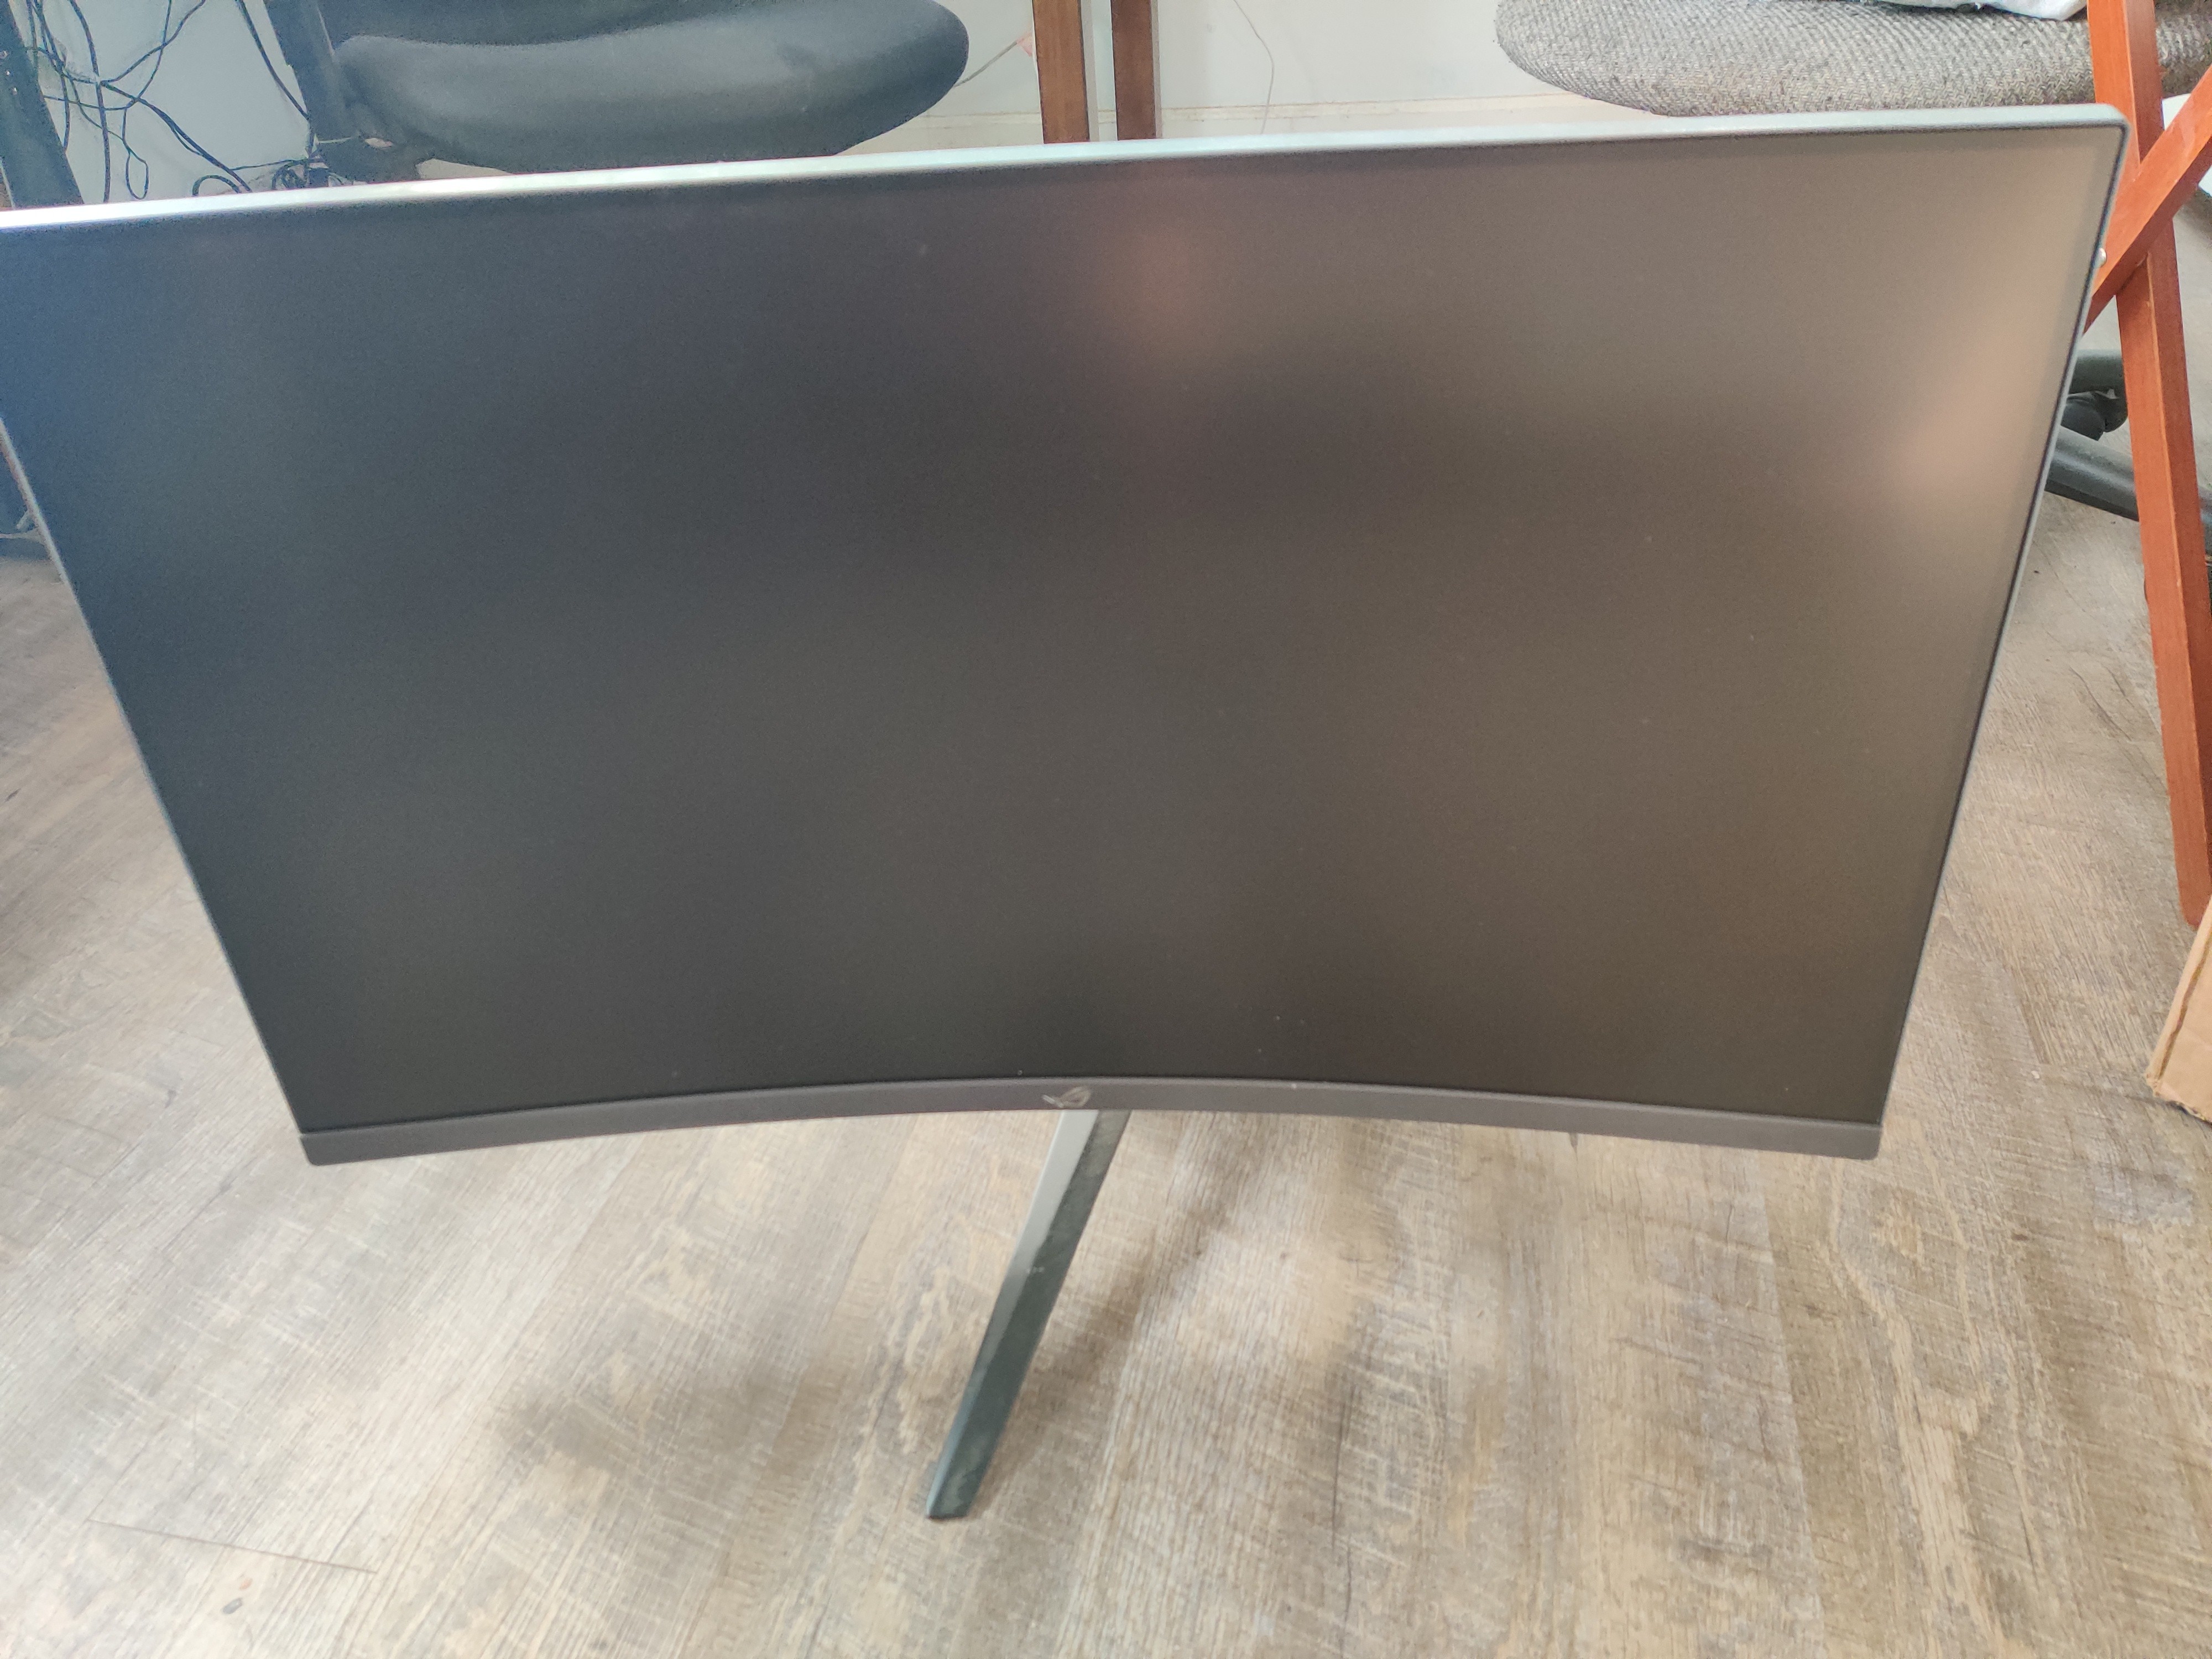 Front of monitor, no damage prior to shipping.